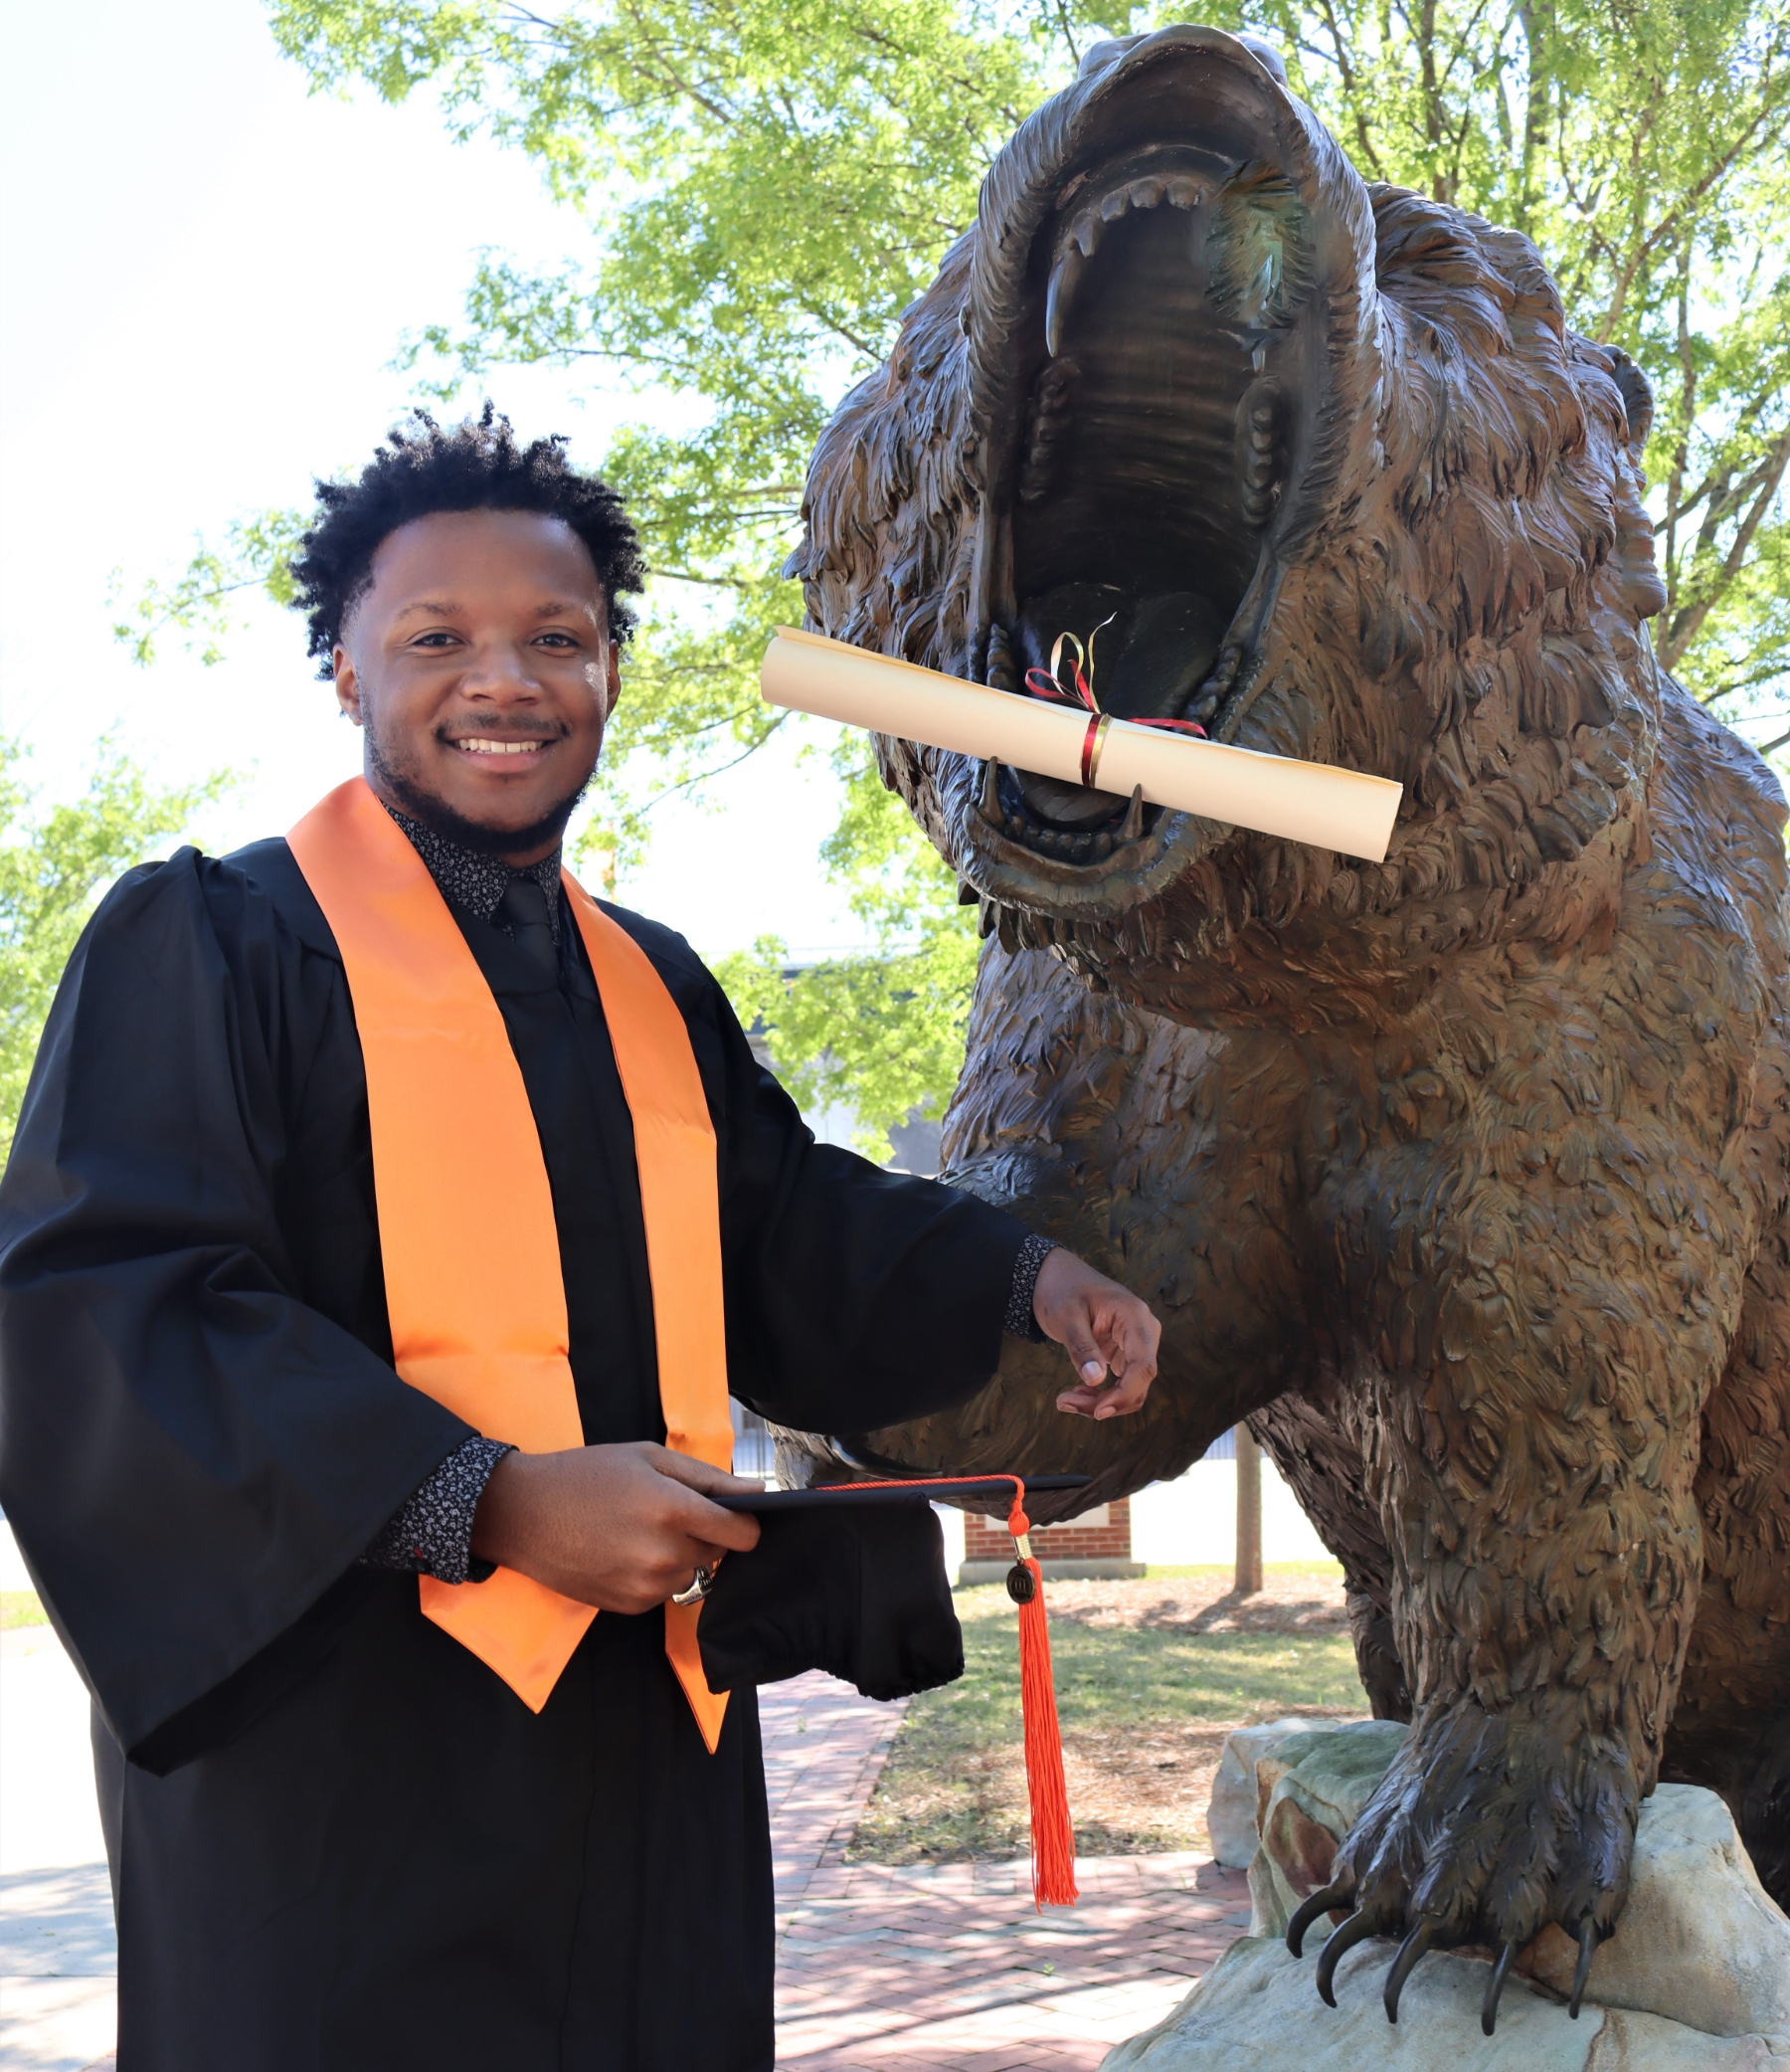 A young man wearing a graduation gown and orange stoll stands next to a bear statue. The statue has a rolled up piece of paper, like a diploma, in its mouth.